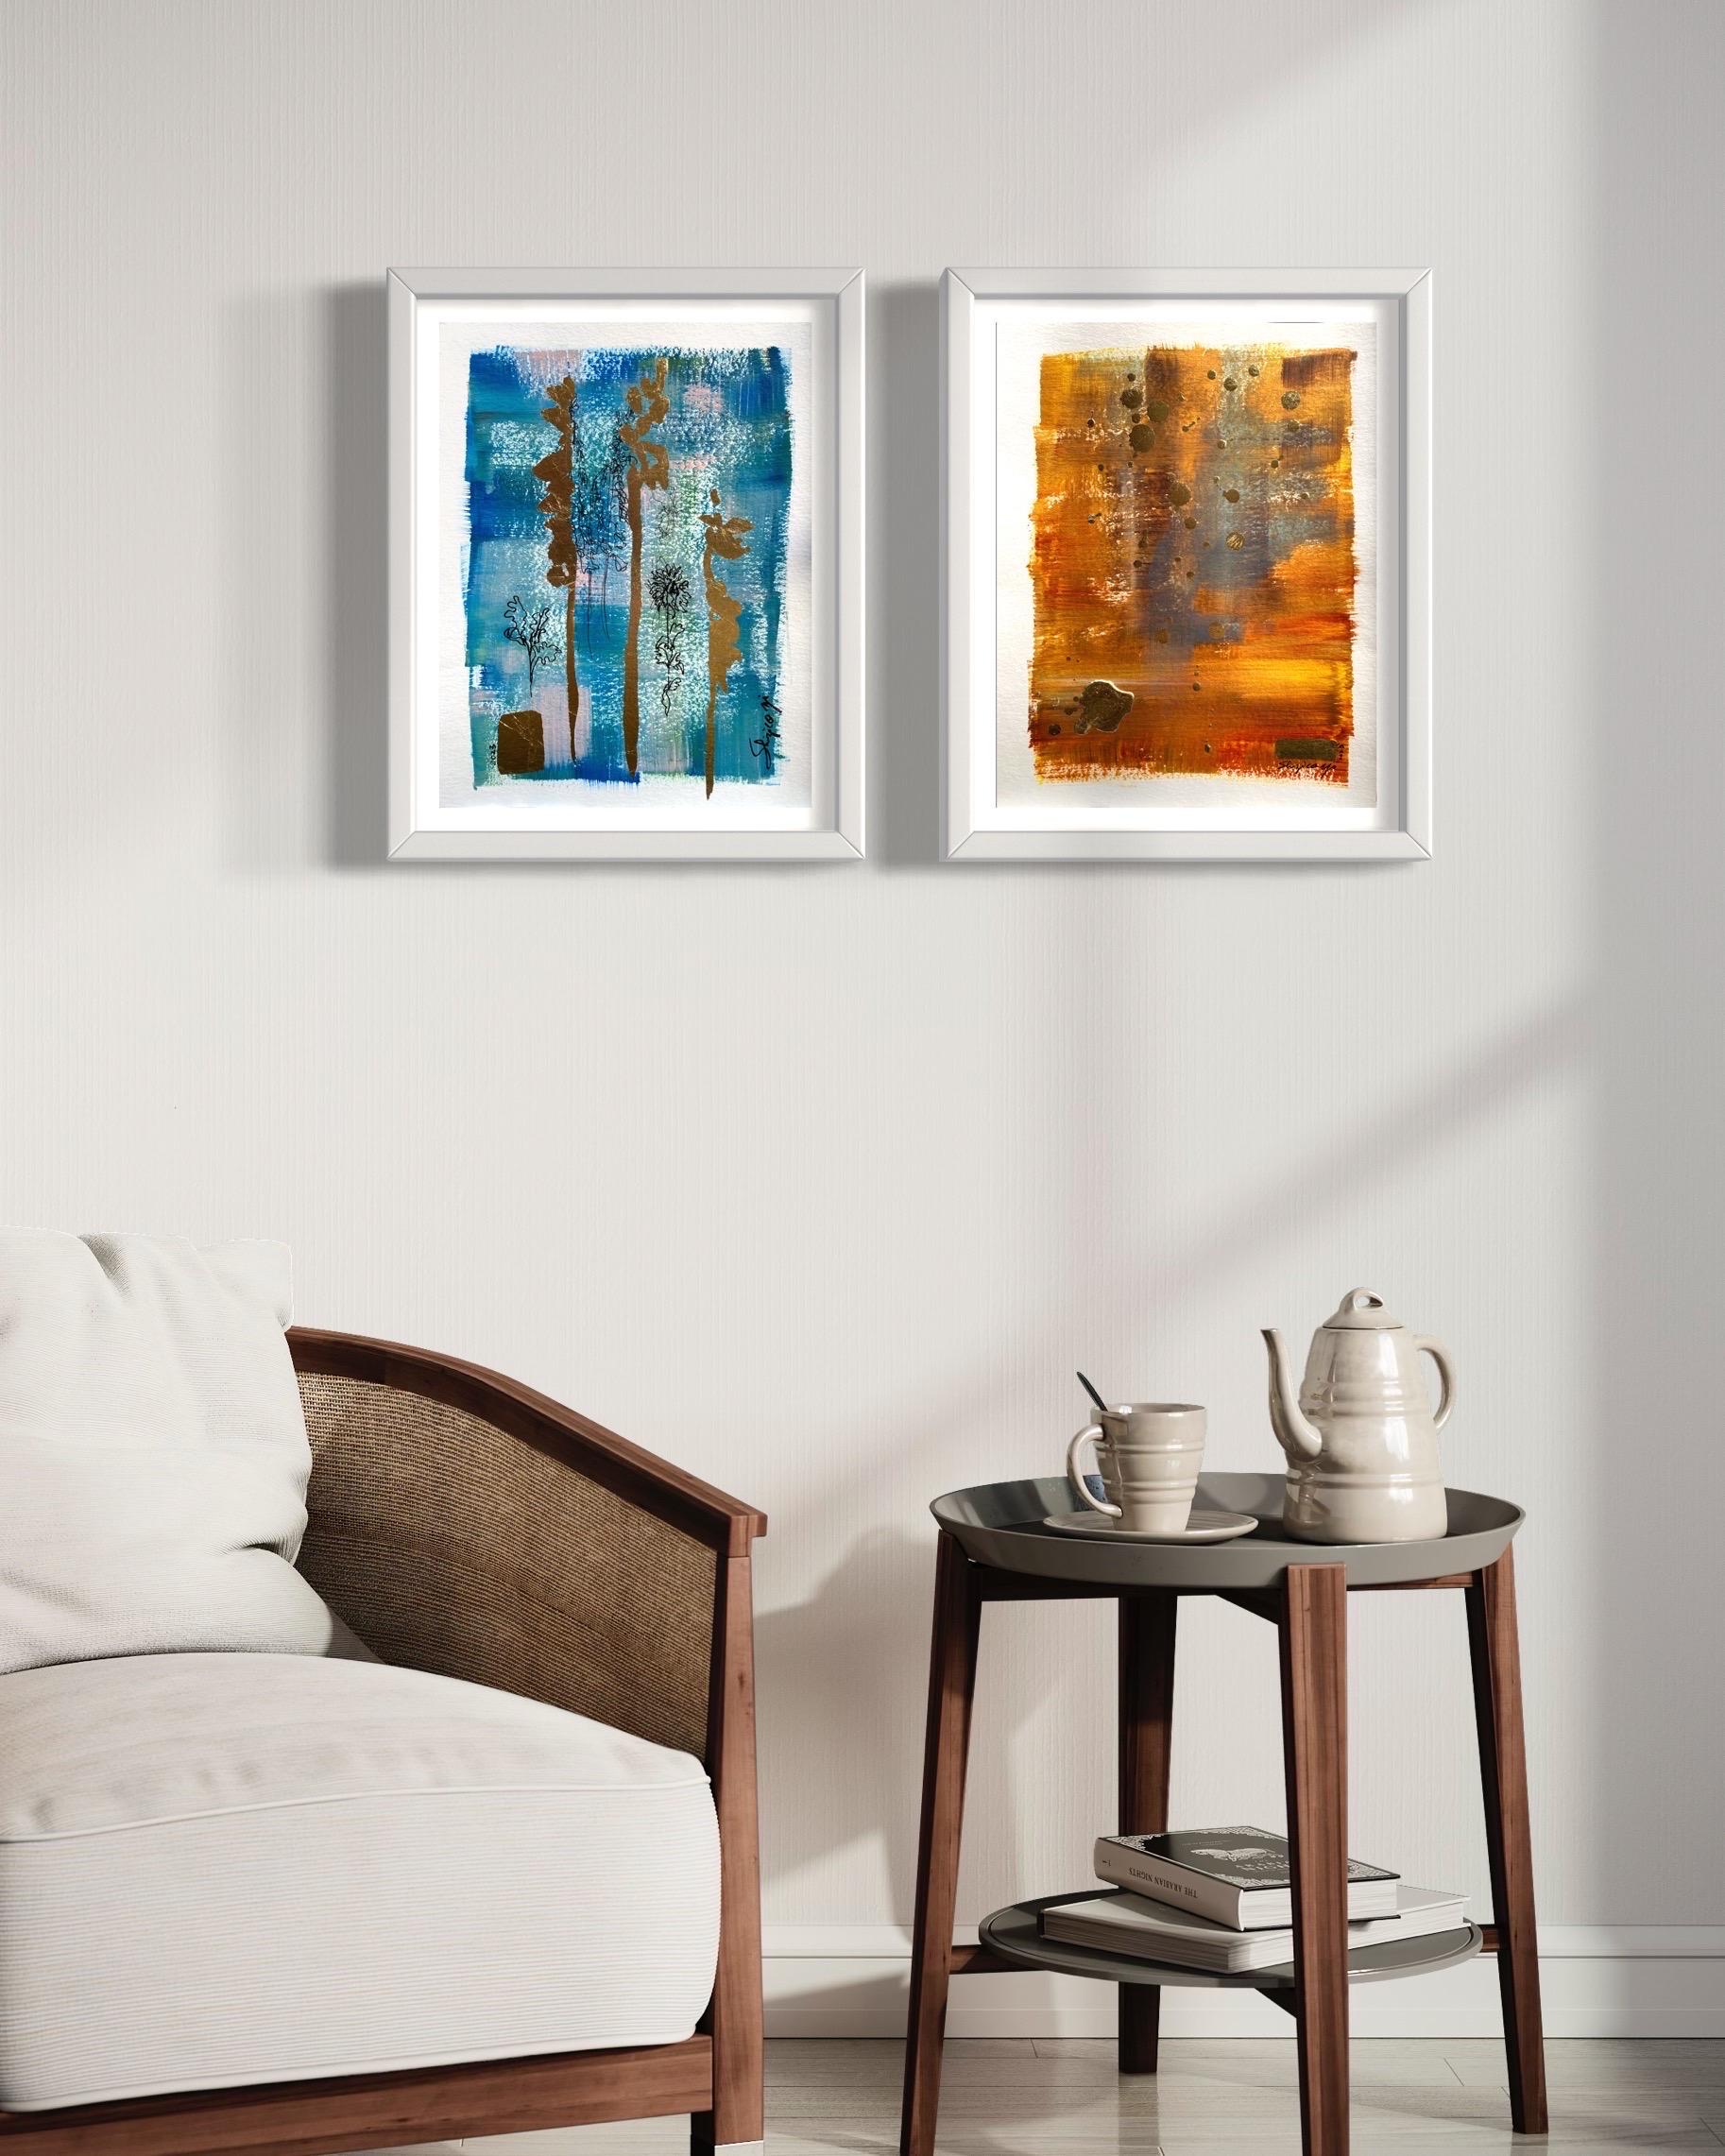 Special Set Offer! This is a set of work on paper includes: Three Wisemen ( blue), Across the Universe (orange) -Original on papers
Medium: Gesso, Acrylic , ink, gold leaf on fine art water colour paper.
32.5 x 25 CM /Each 
*Varnished, ready to be